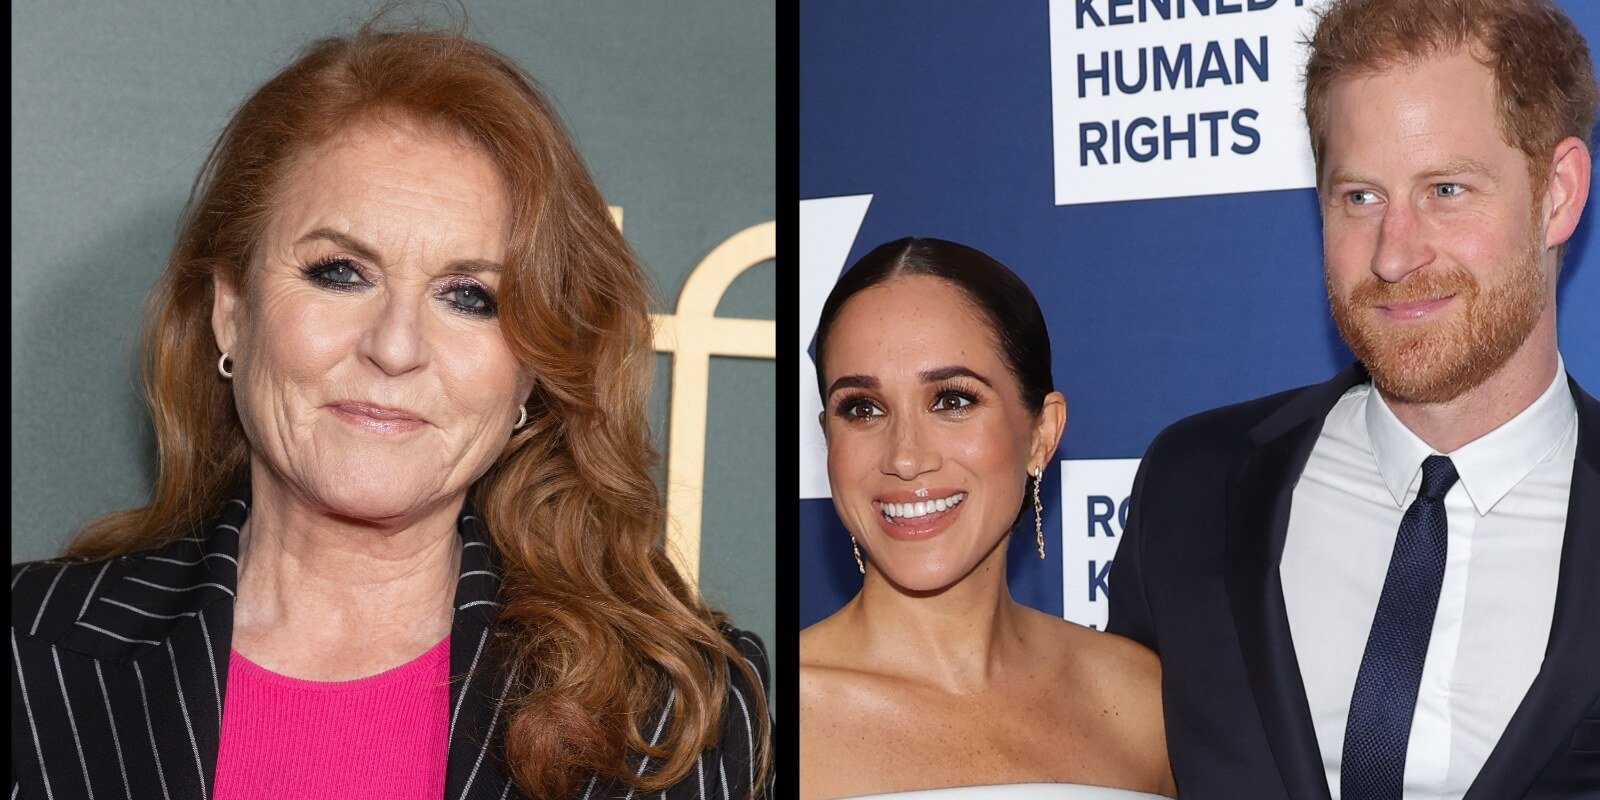 Sarah Ferguson applauds Meghan Markle and Prince Harry for standing up for their beliefs.